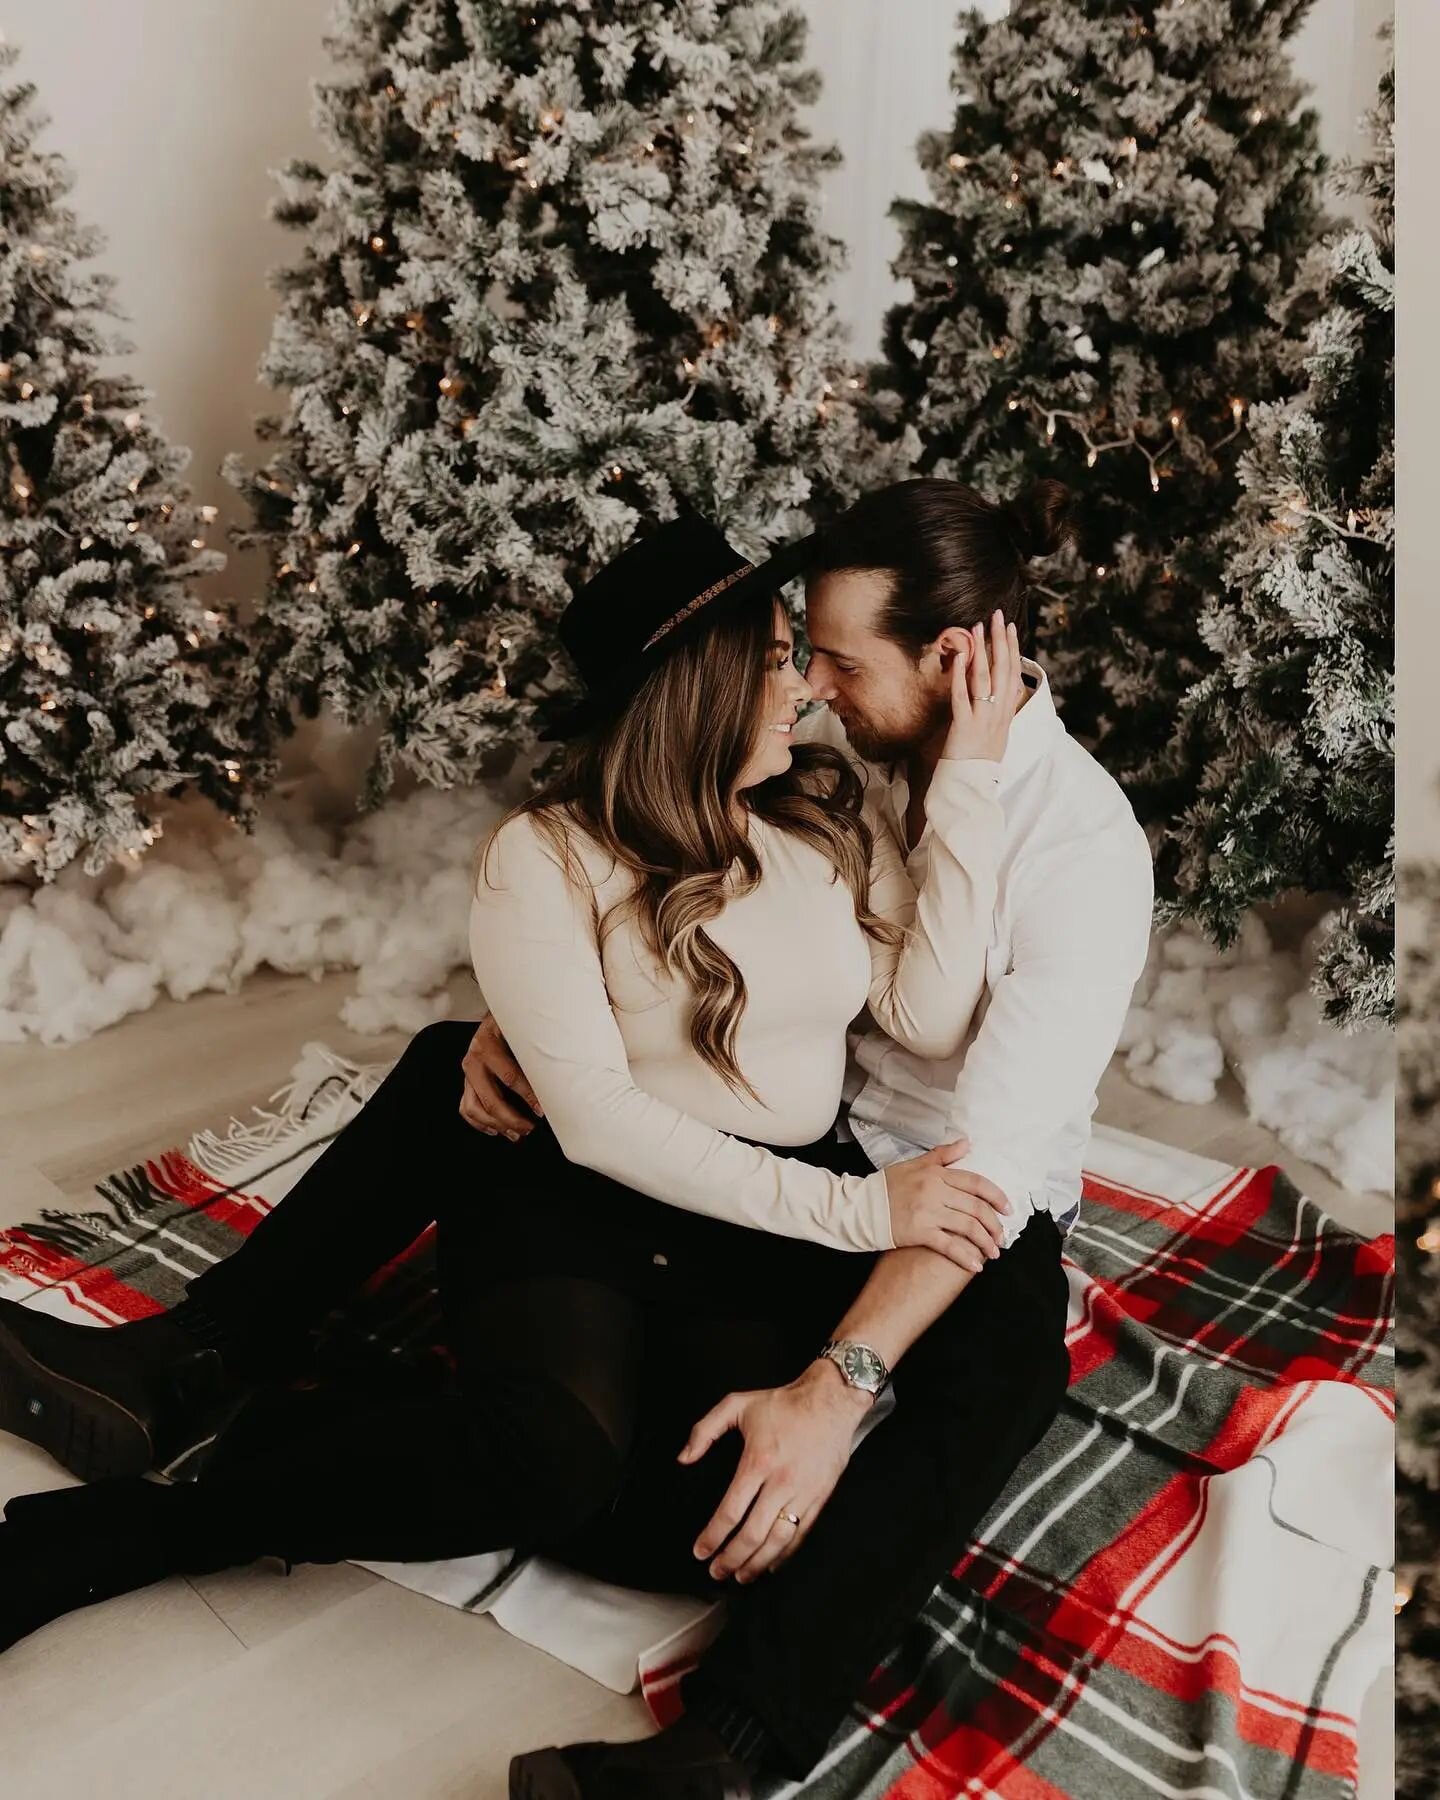 Angie Solis left us wanting more and more with these stunning shots of a beautiful couple in The Seasons💞❆🌲! Angie used her Canon R6 📸 with a 35mm lens f1.4 at 10:40am.&nbsp;

&ldquo;My favorite part of shooting at the studio was The Simple Christ